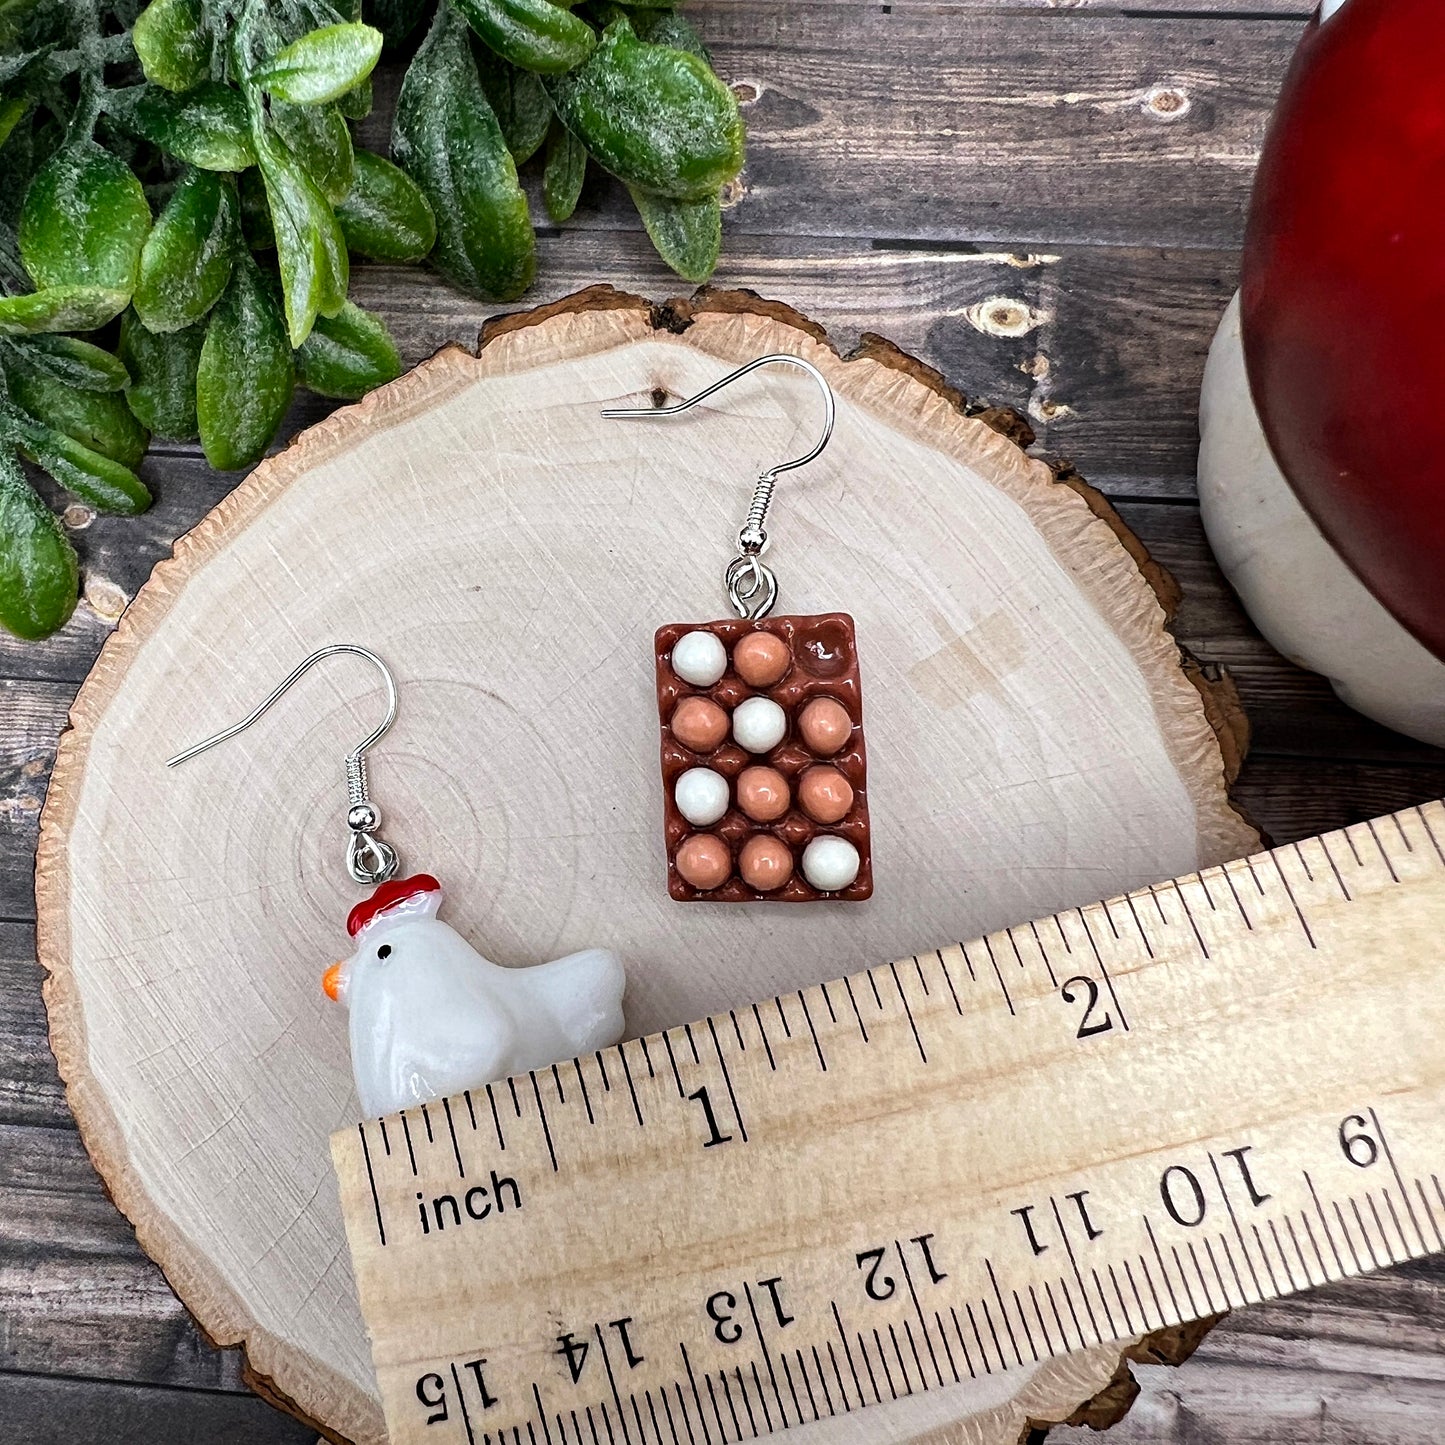 Mismatched Chicken and Egg Quirky Animal Earrings